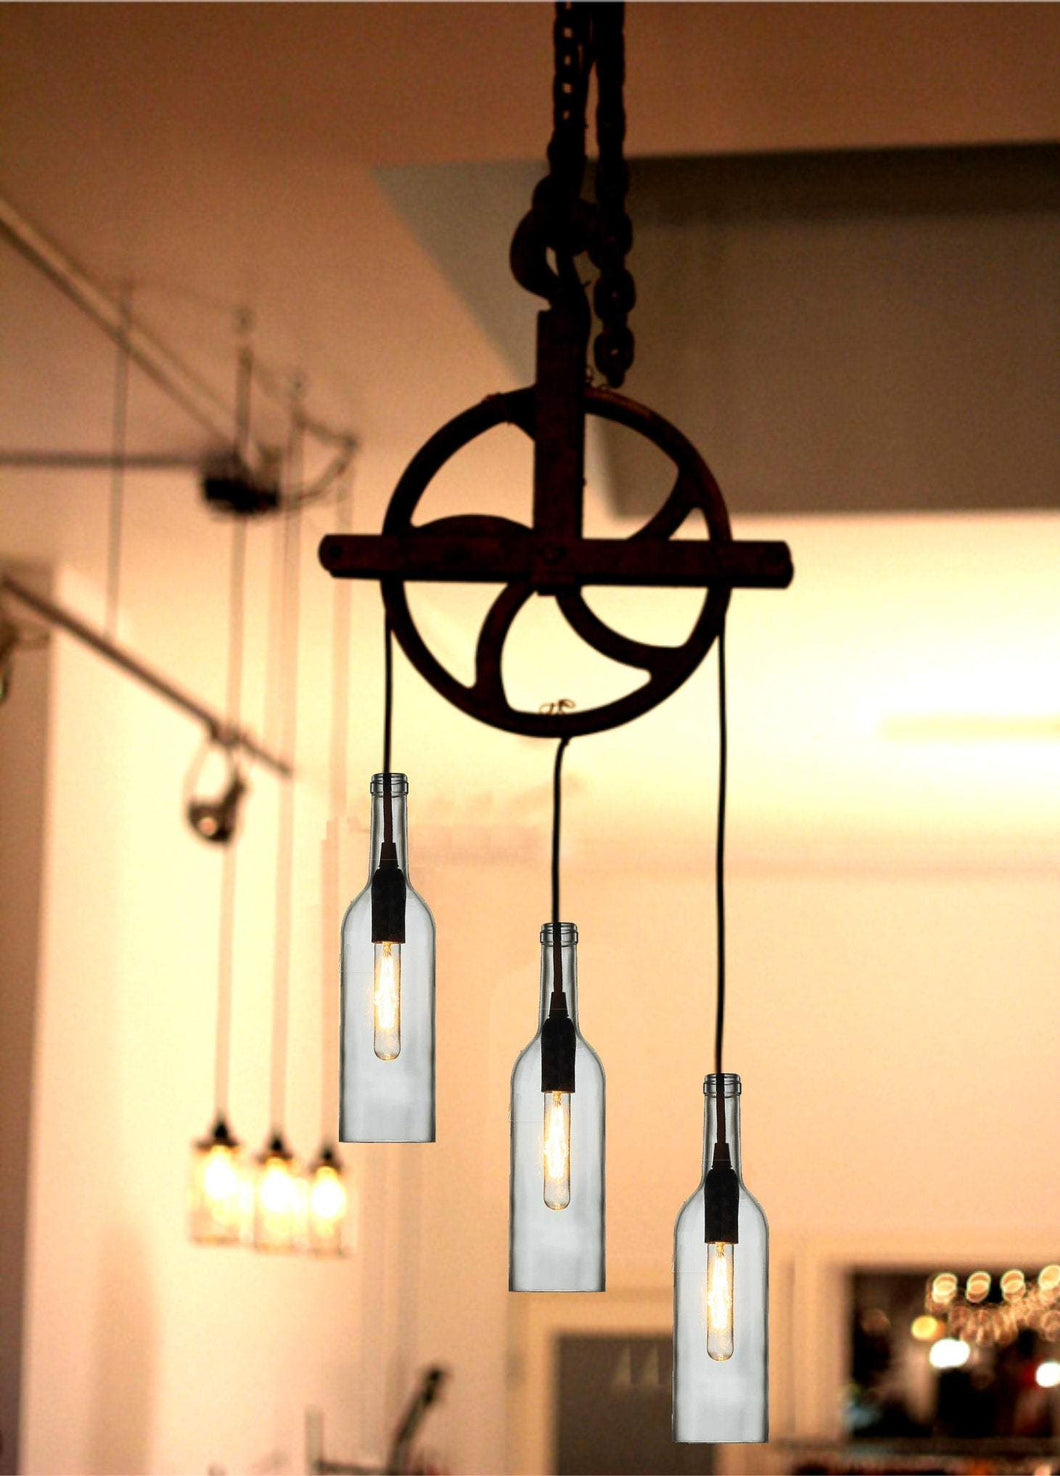 Beautiful Pulley lamp with wine bottles